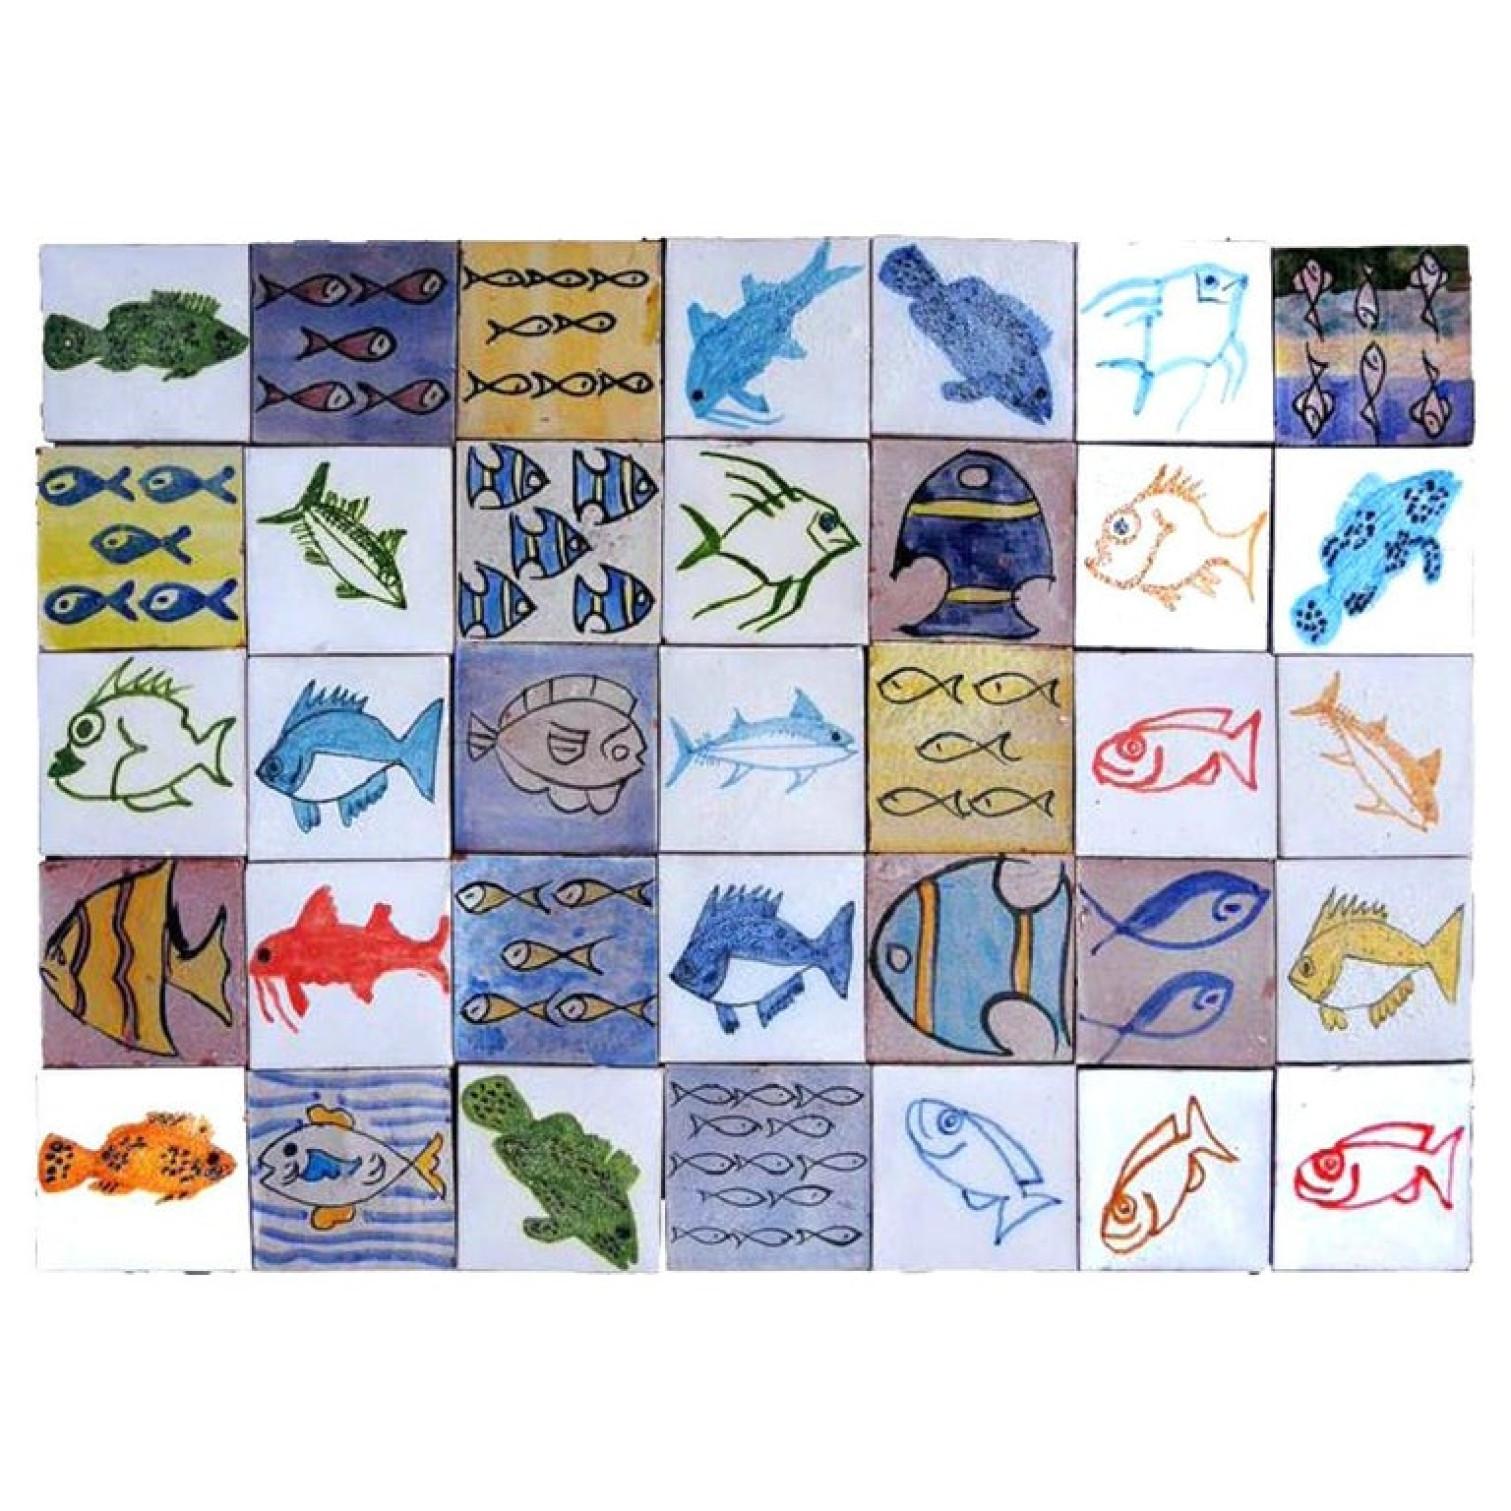 A unique patchwork composition panel. The fun and colorful hand painted panel consists of 35 moroccan tiles. All tiles show sketches and drawings of fish in the style of the Berber culture. Each of them are unique.

The Berbers (or Amazigh) are the